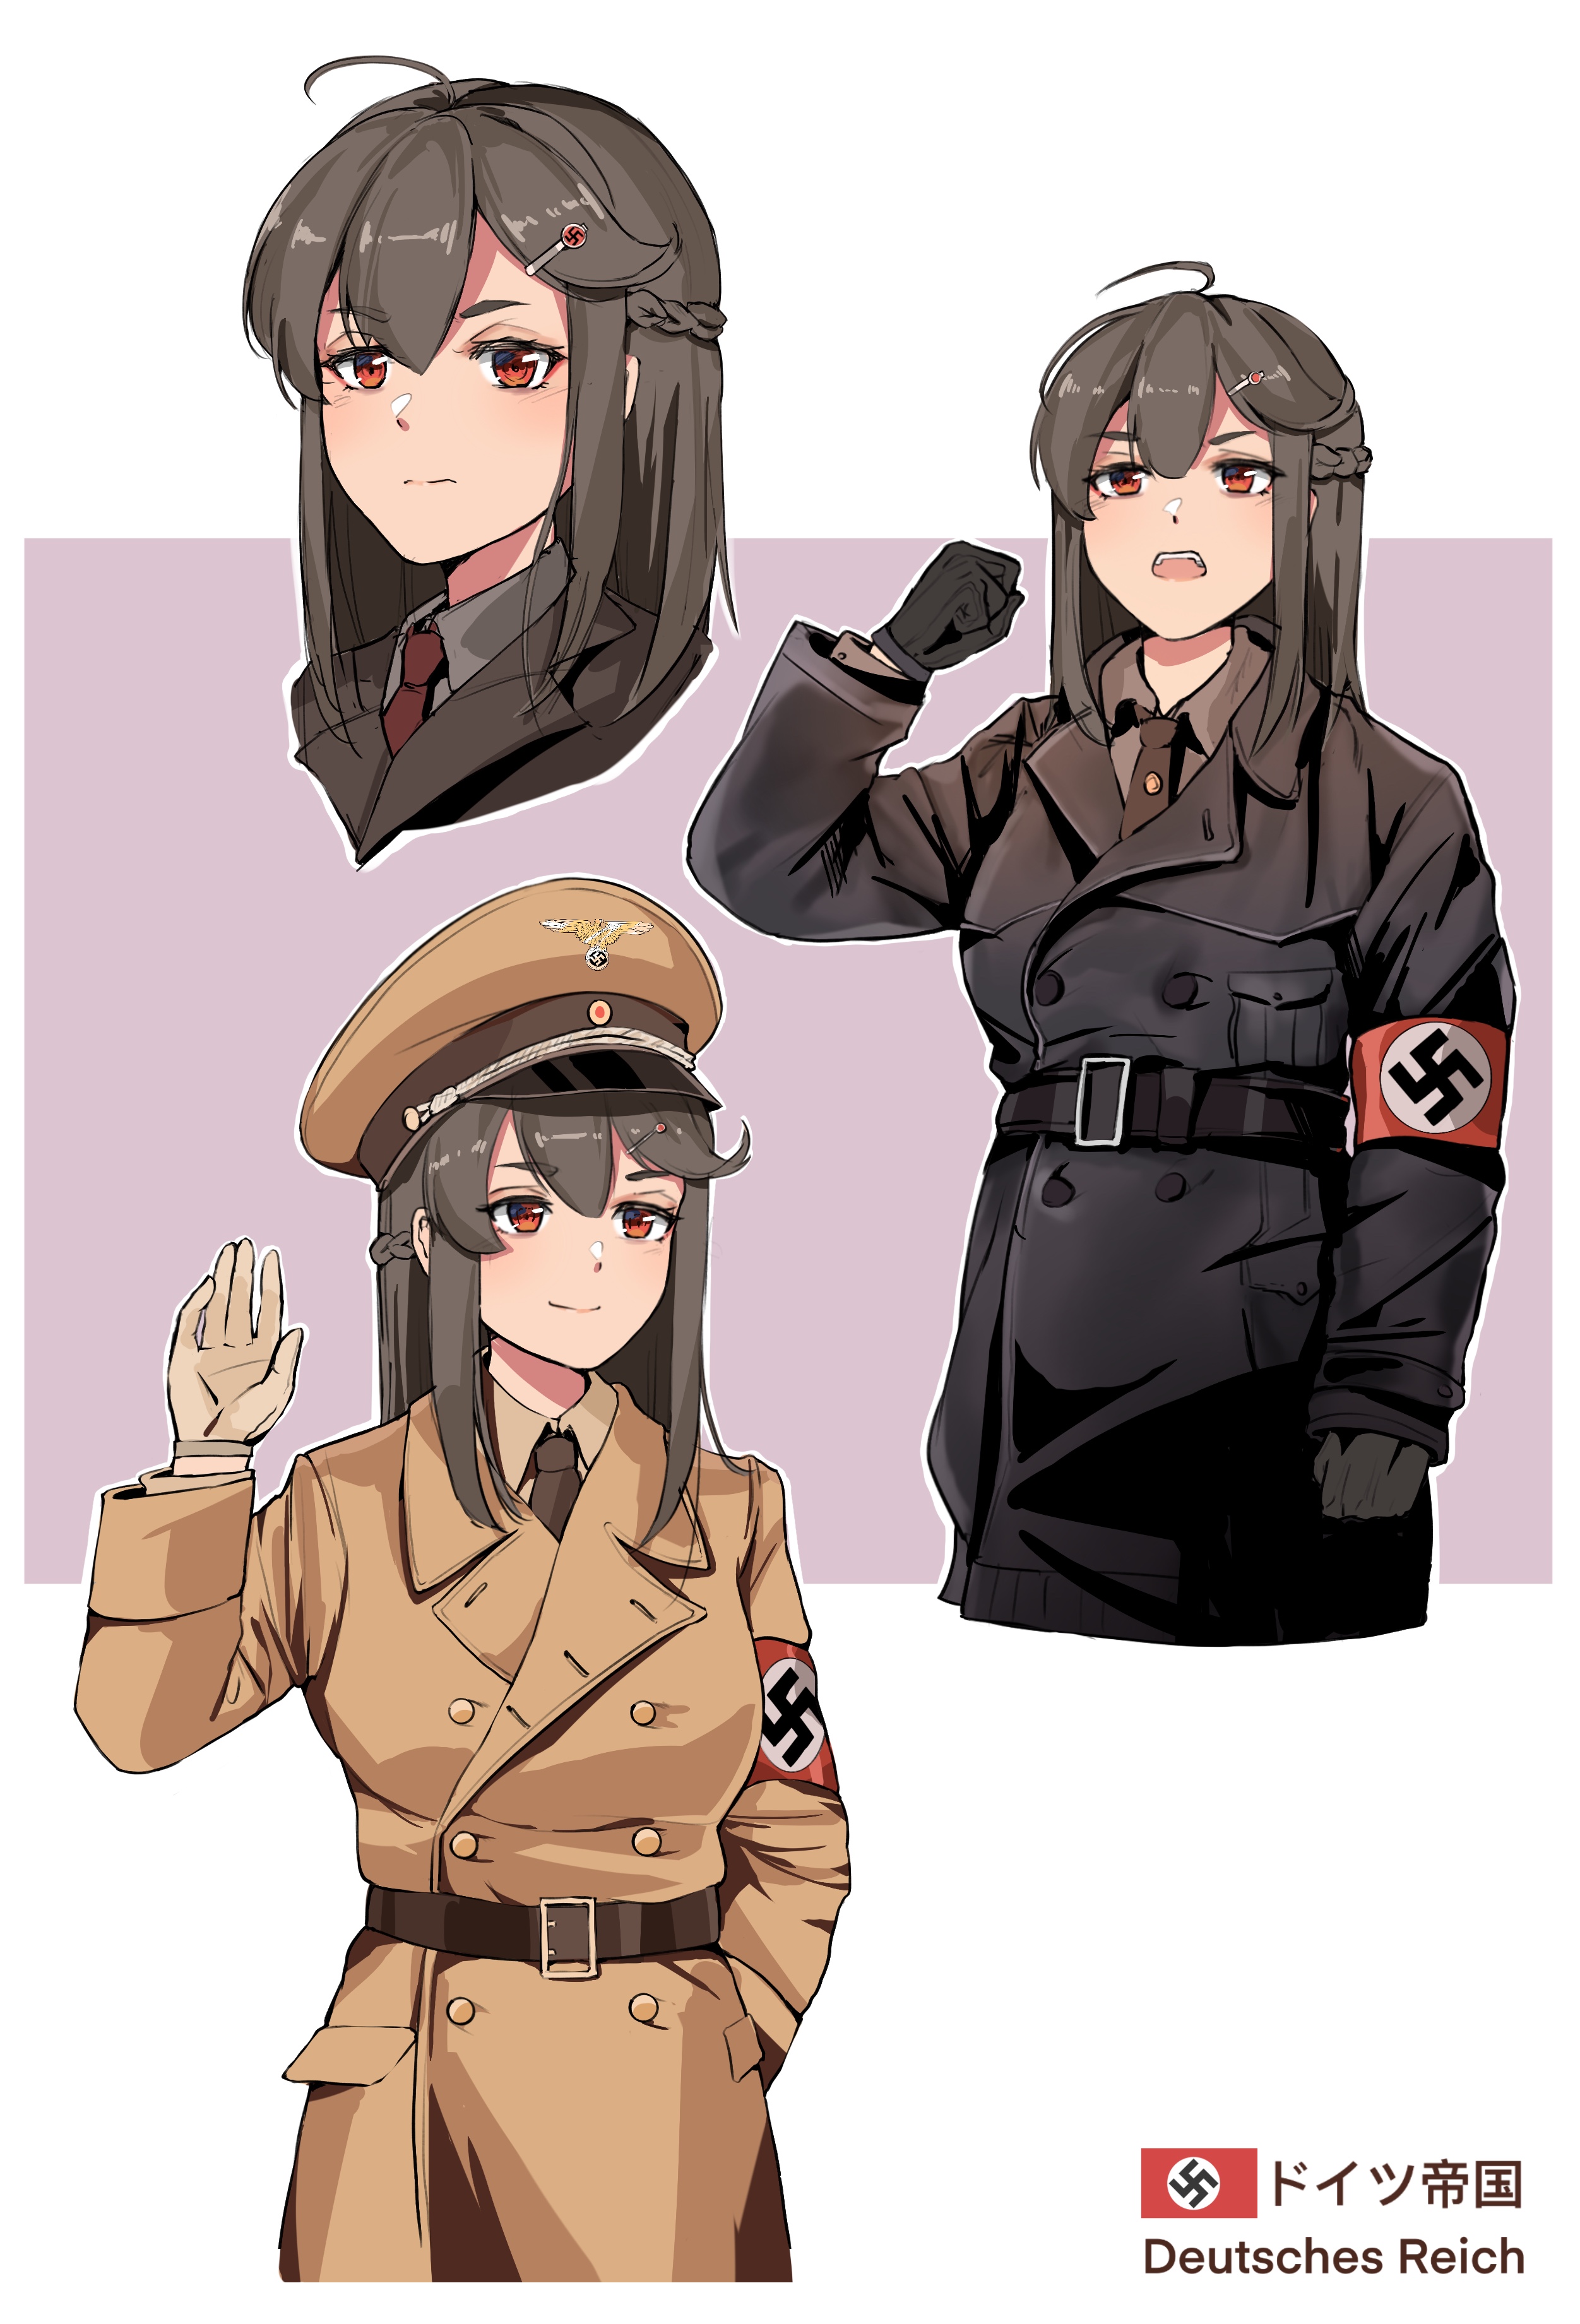 Anime 2503x3682 anime girls anime original characters red eyes brunette Military Hat peaked cap hat necktie tie belt swastika military uniform coats leather coat leather belt hair ornament waving Leather gloves pale Unicron (Brous) long hair white gloves hairpins German Nazi smiling hands in pockets Caucasian